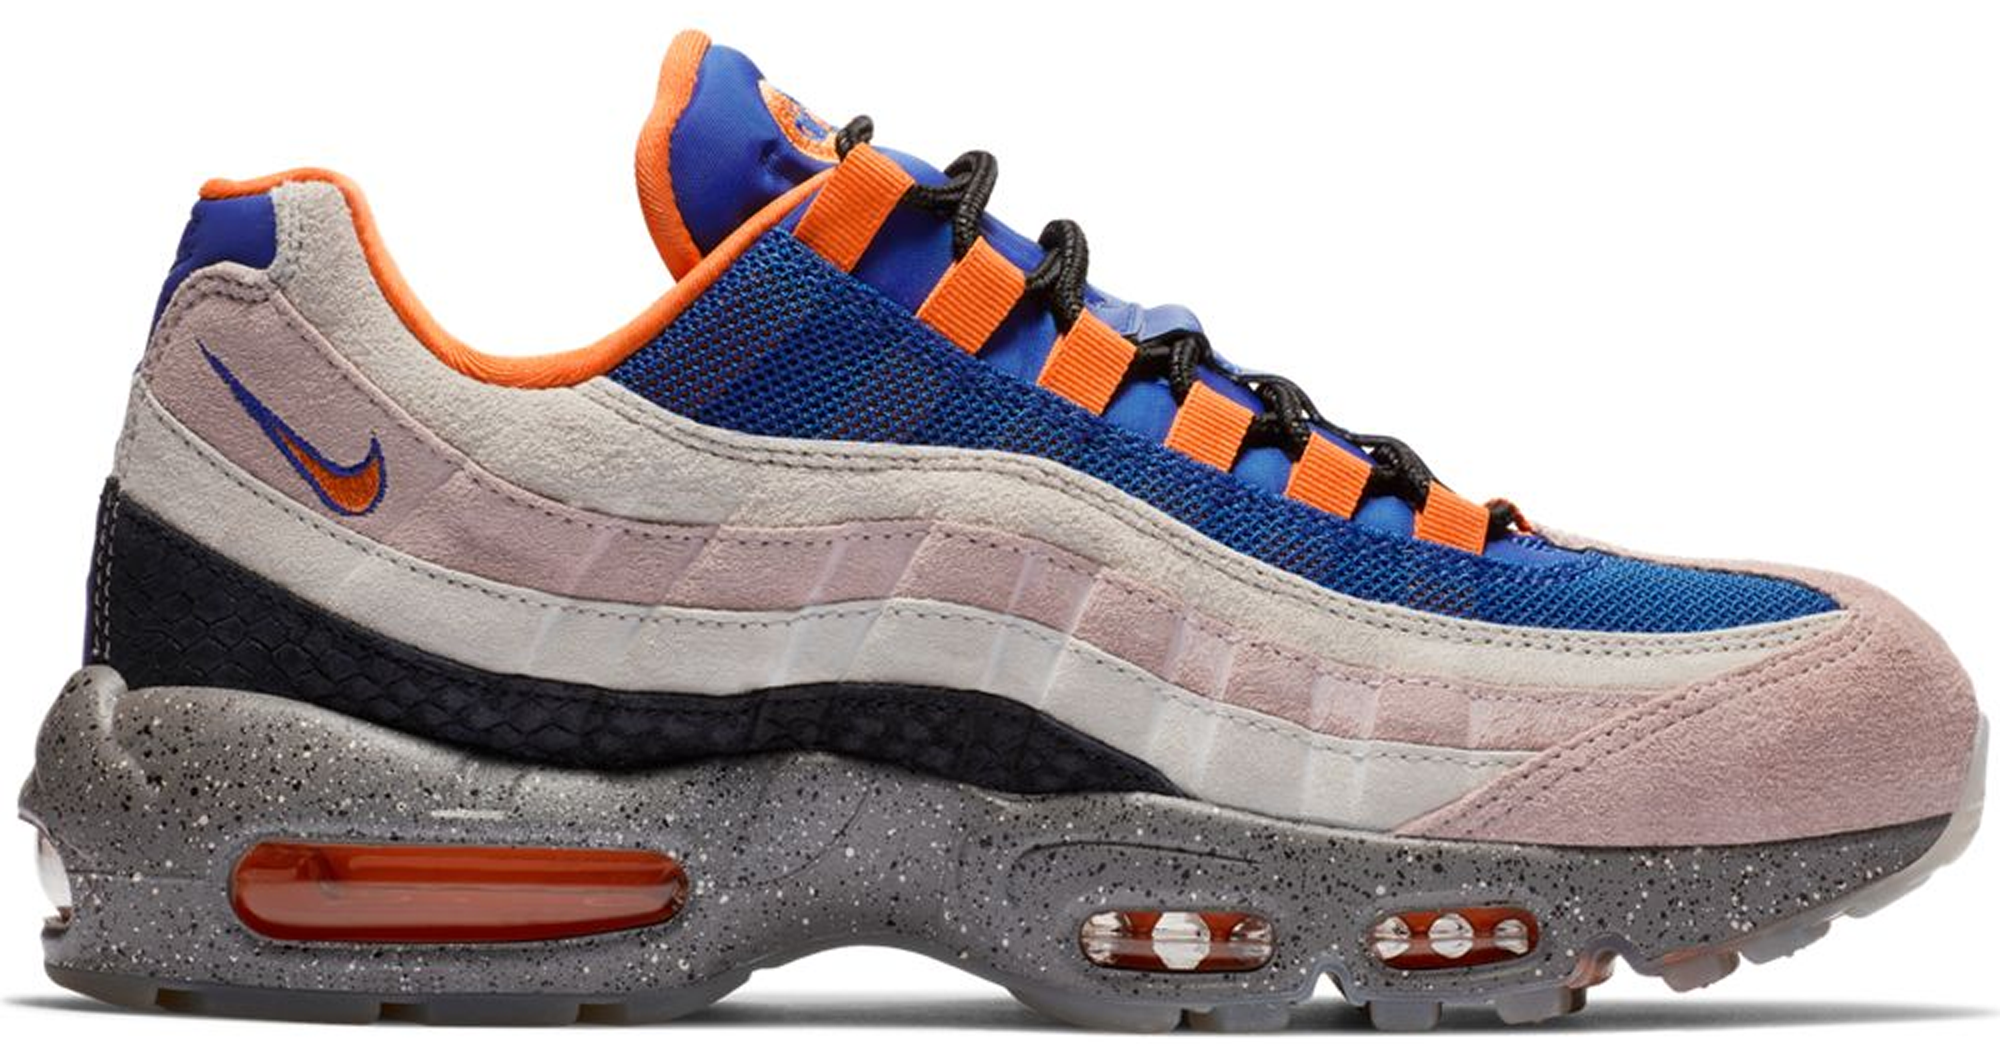 Nike Air Max 95 King of the Mountain 